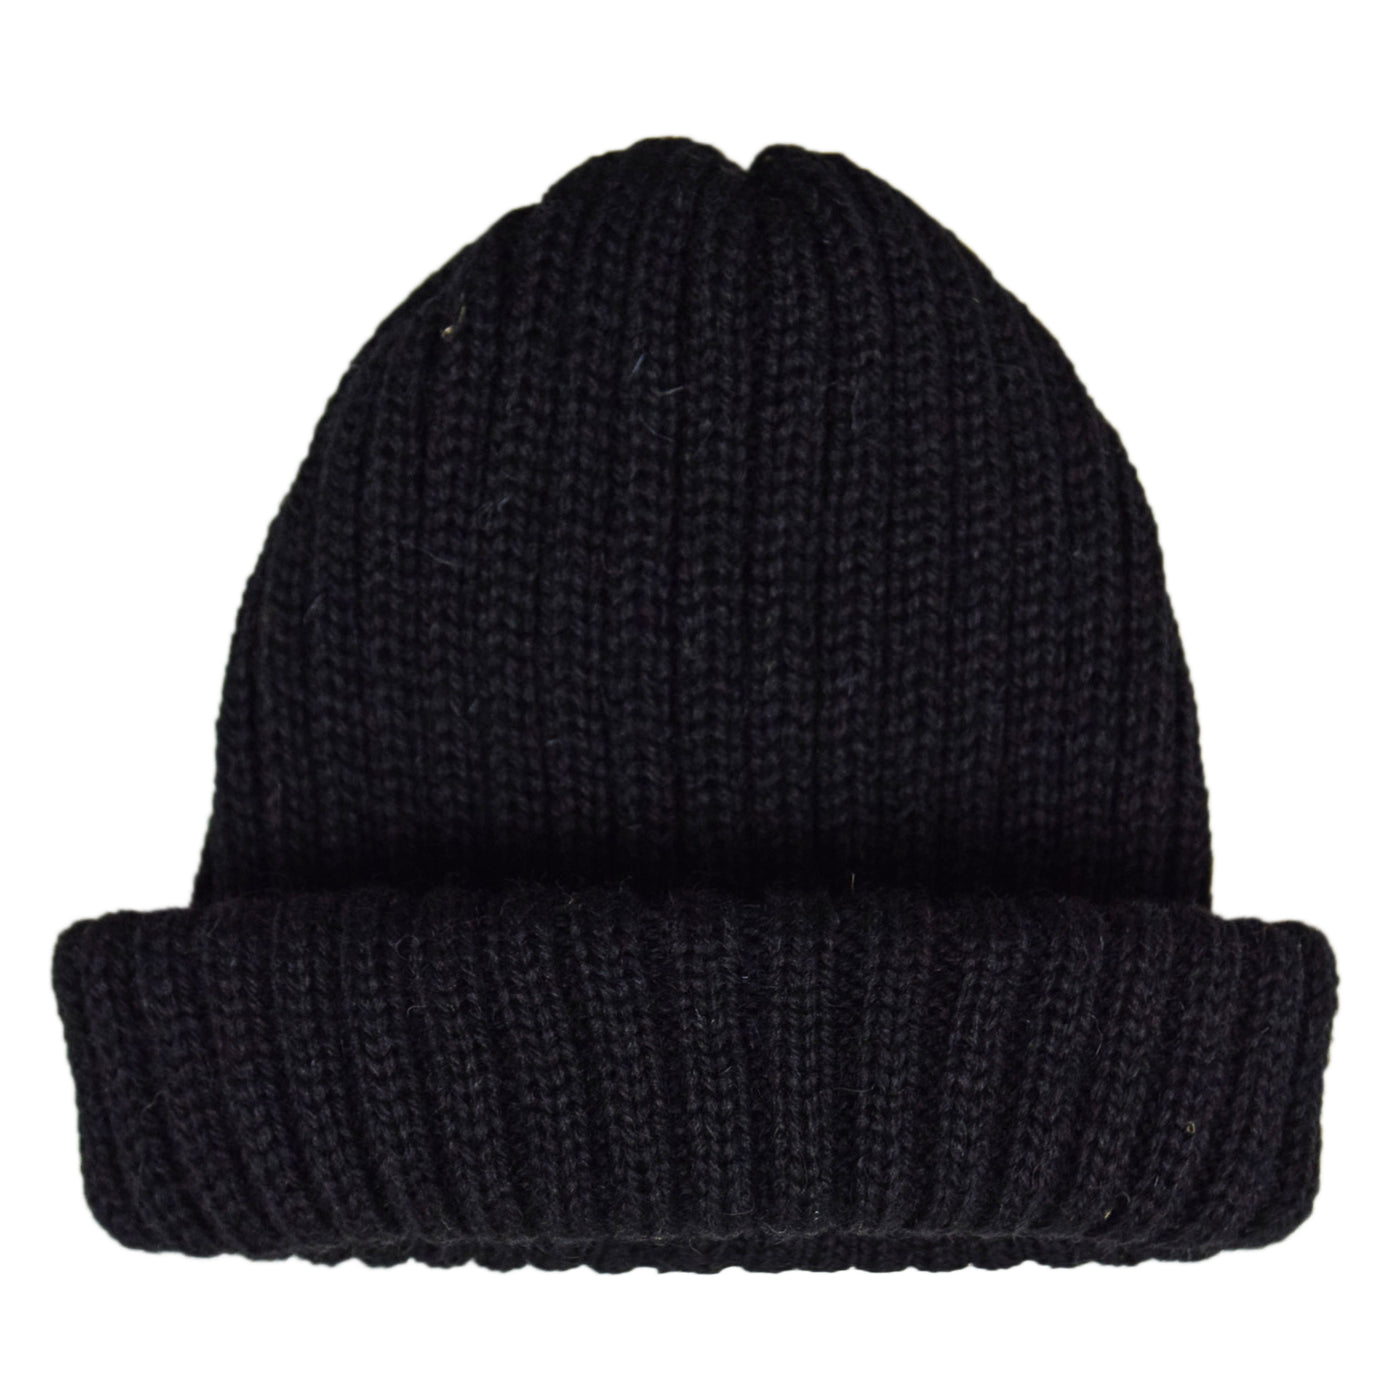 Connor Reilly Wool Watch Cap Black Made In England Front